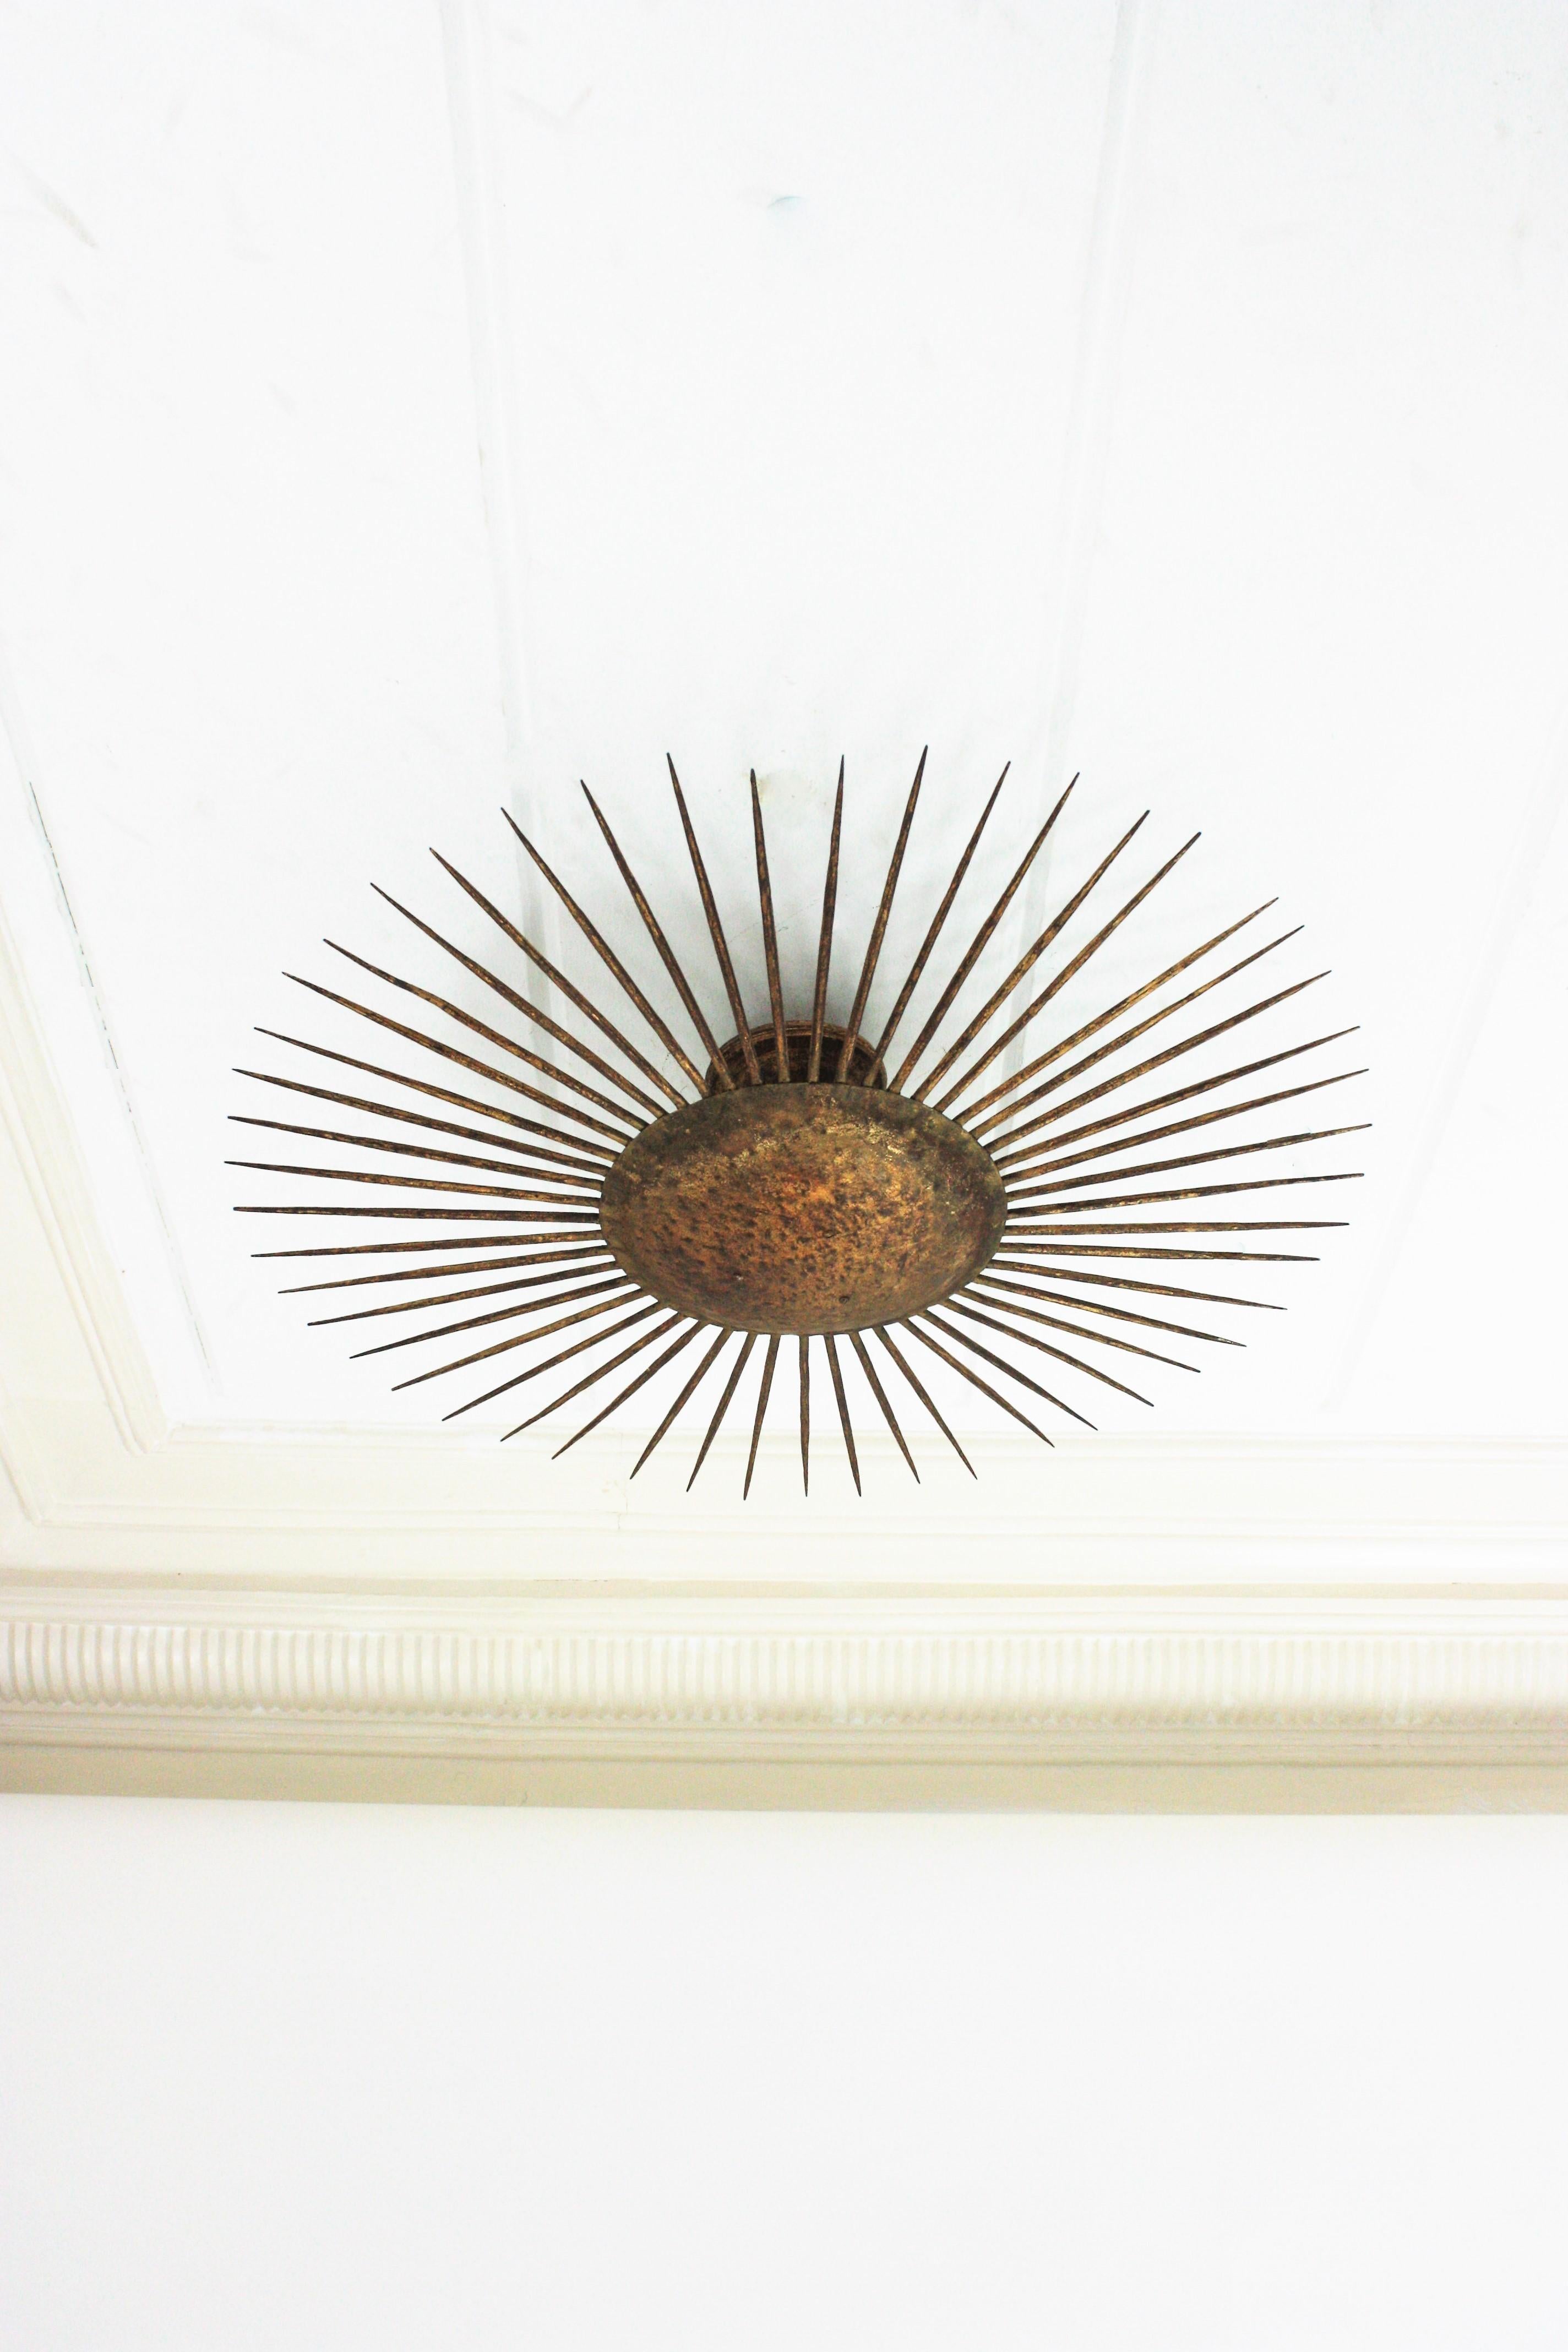 French Sunburst Ceiling Light Fixture in Gilt Wrought Iron, 1940s For Sale 5